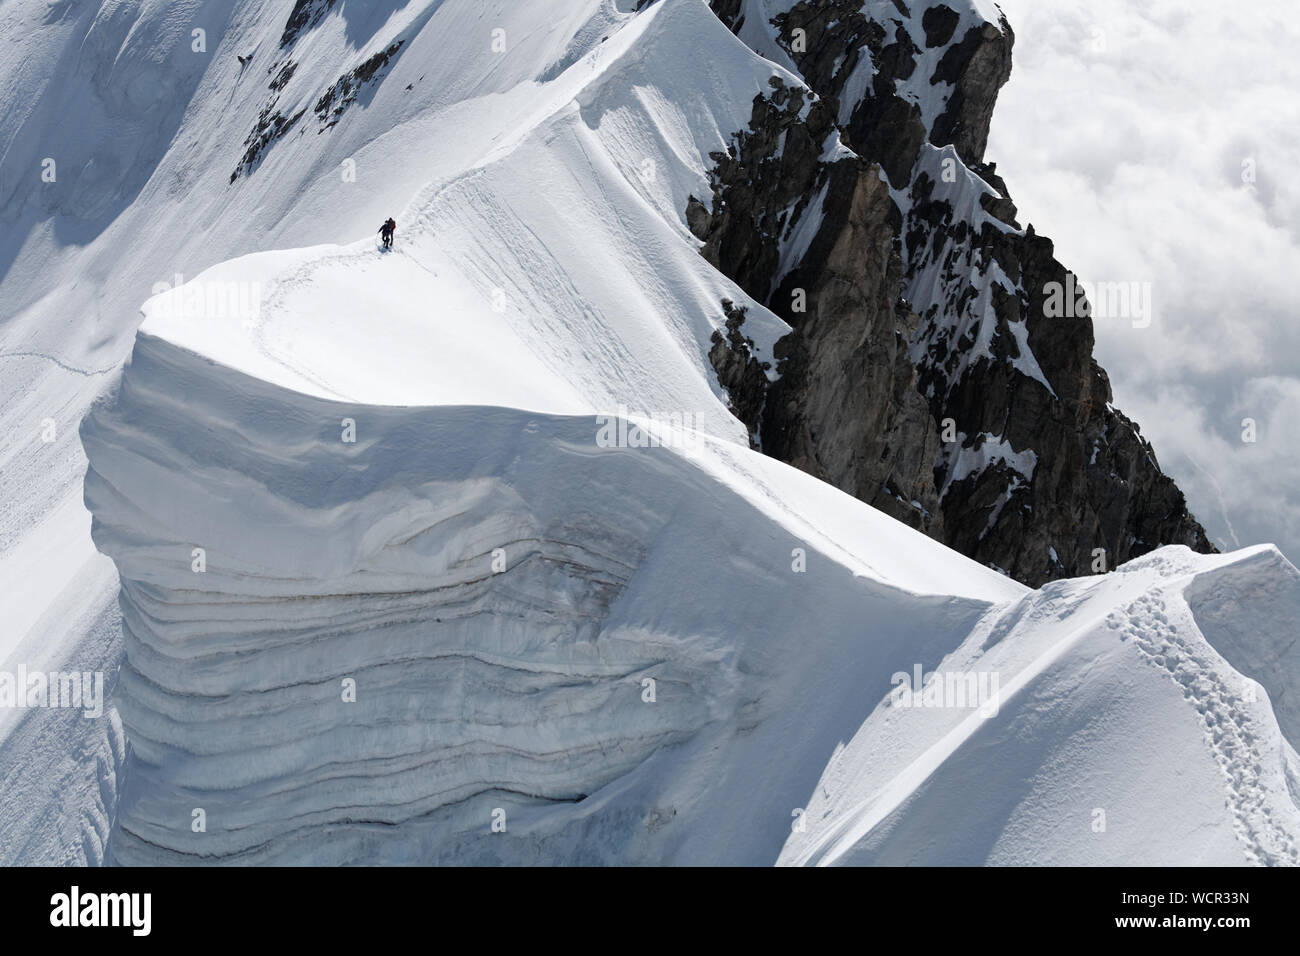 Scenic View Of People On Snow Covered Aiguille De Rochefort Stock Photo